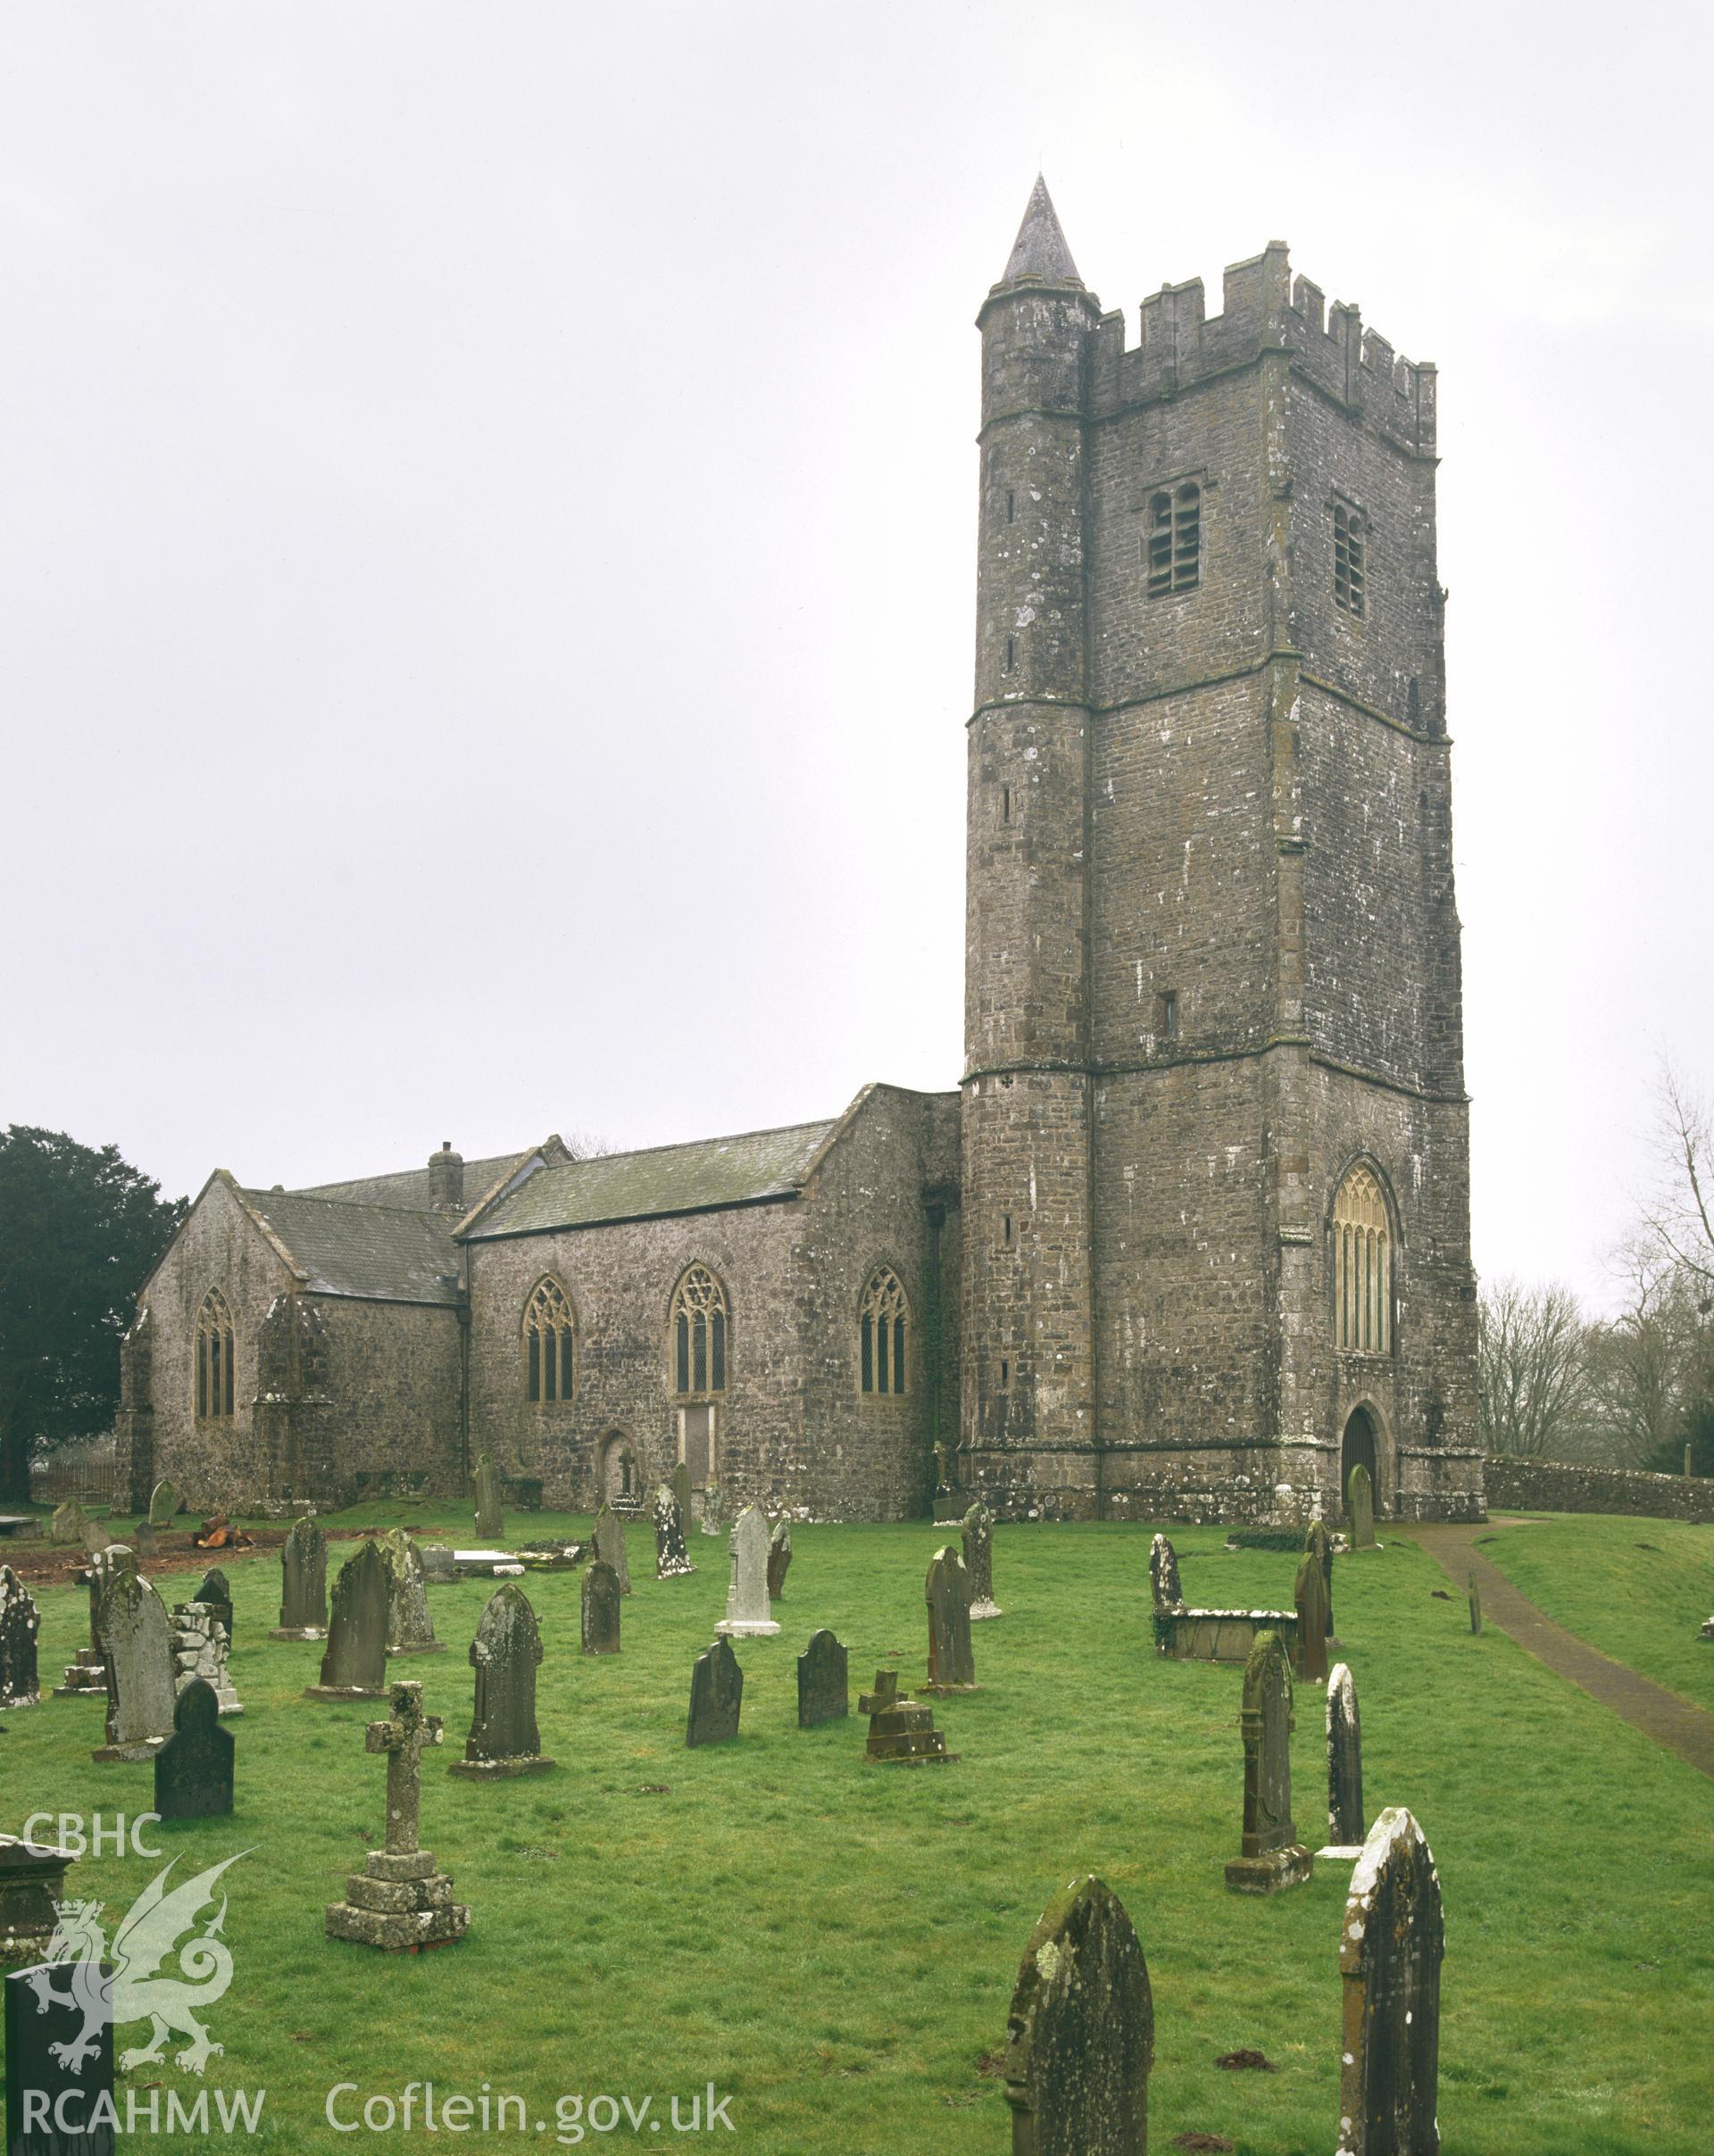 RCAHMW colour transparency showing view of St Mary's Church, Carew, taken by I.N. Wright, 2003.